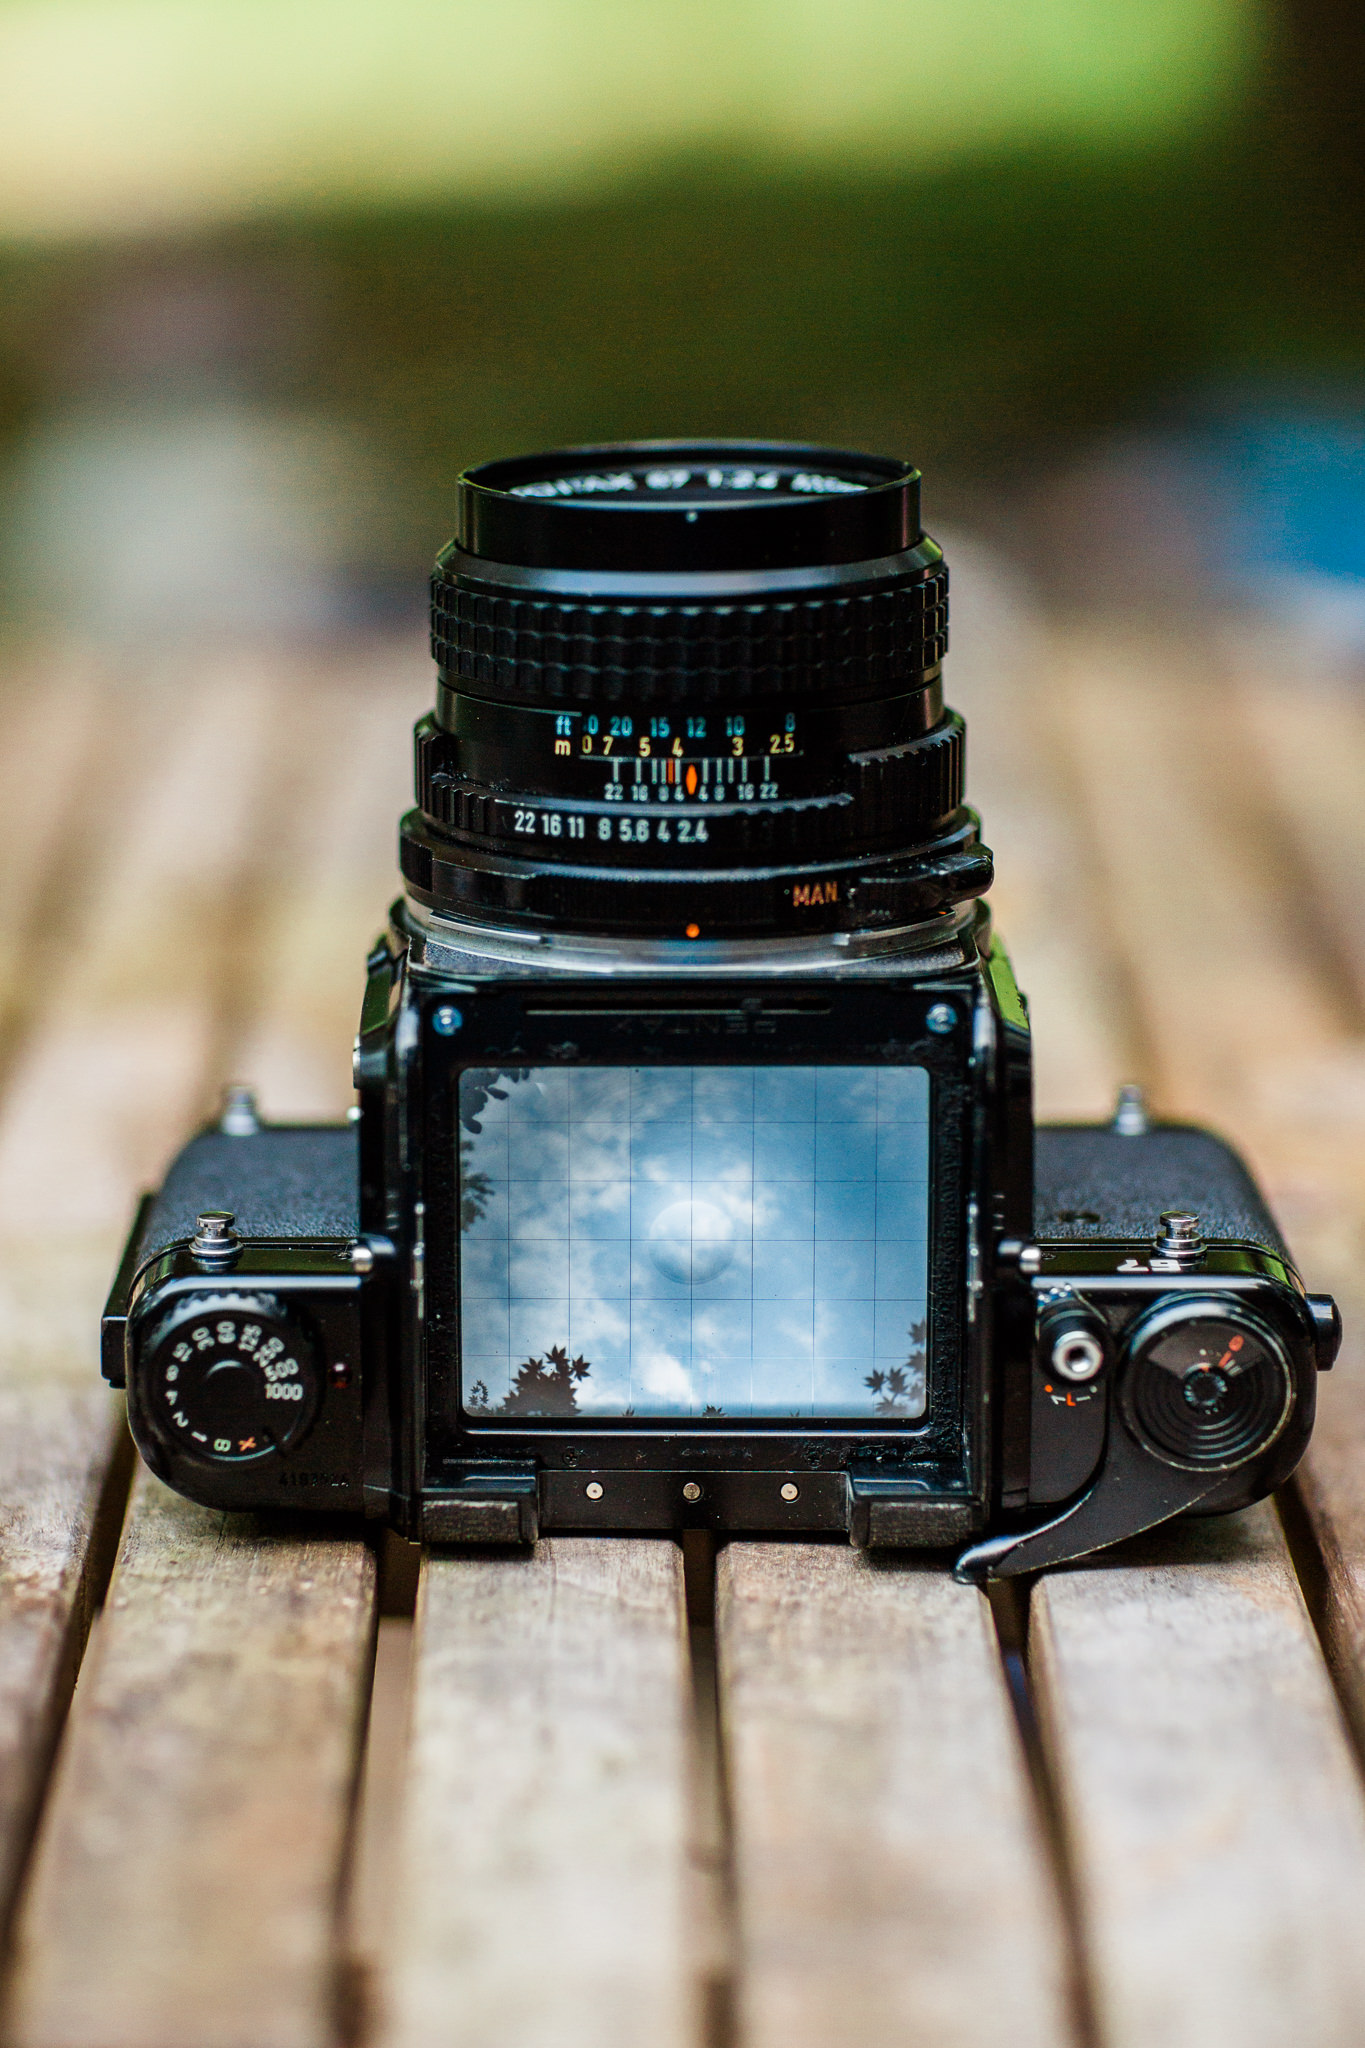 A Buying Guide: What are the Differences Between Pentax 6x7 and